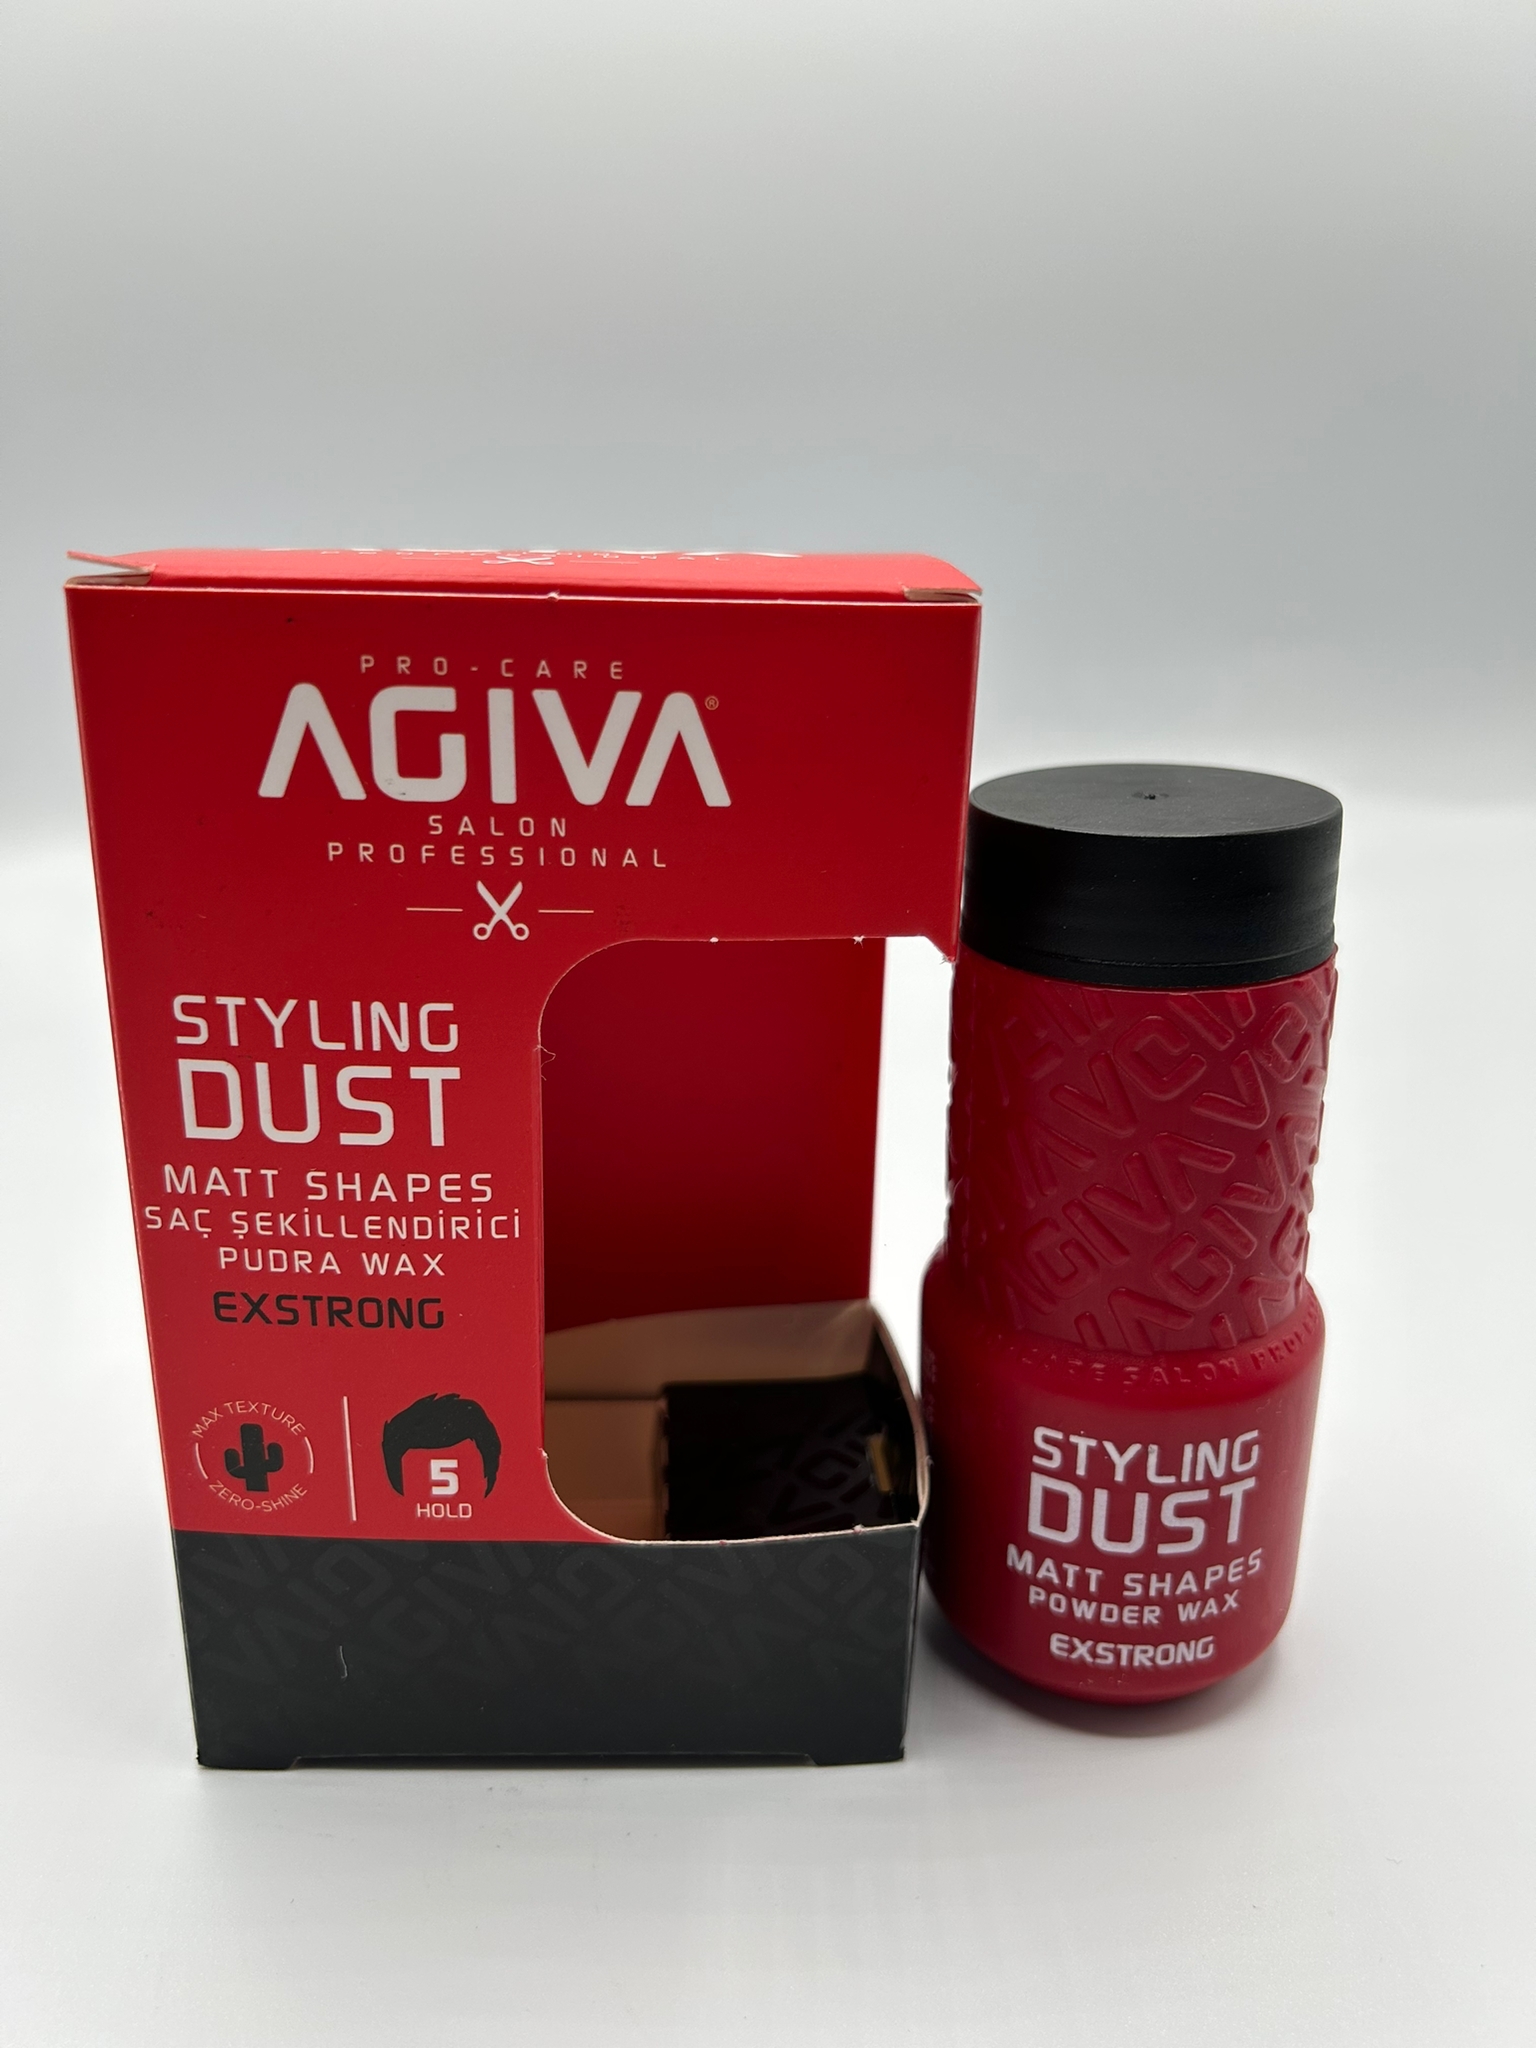 AGIVA HAIR POWDER NO 03 EXTRA STRONG STYLING